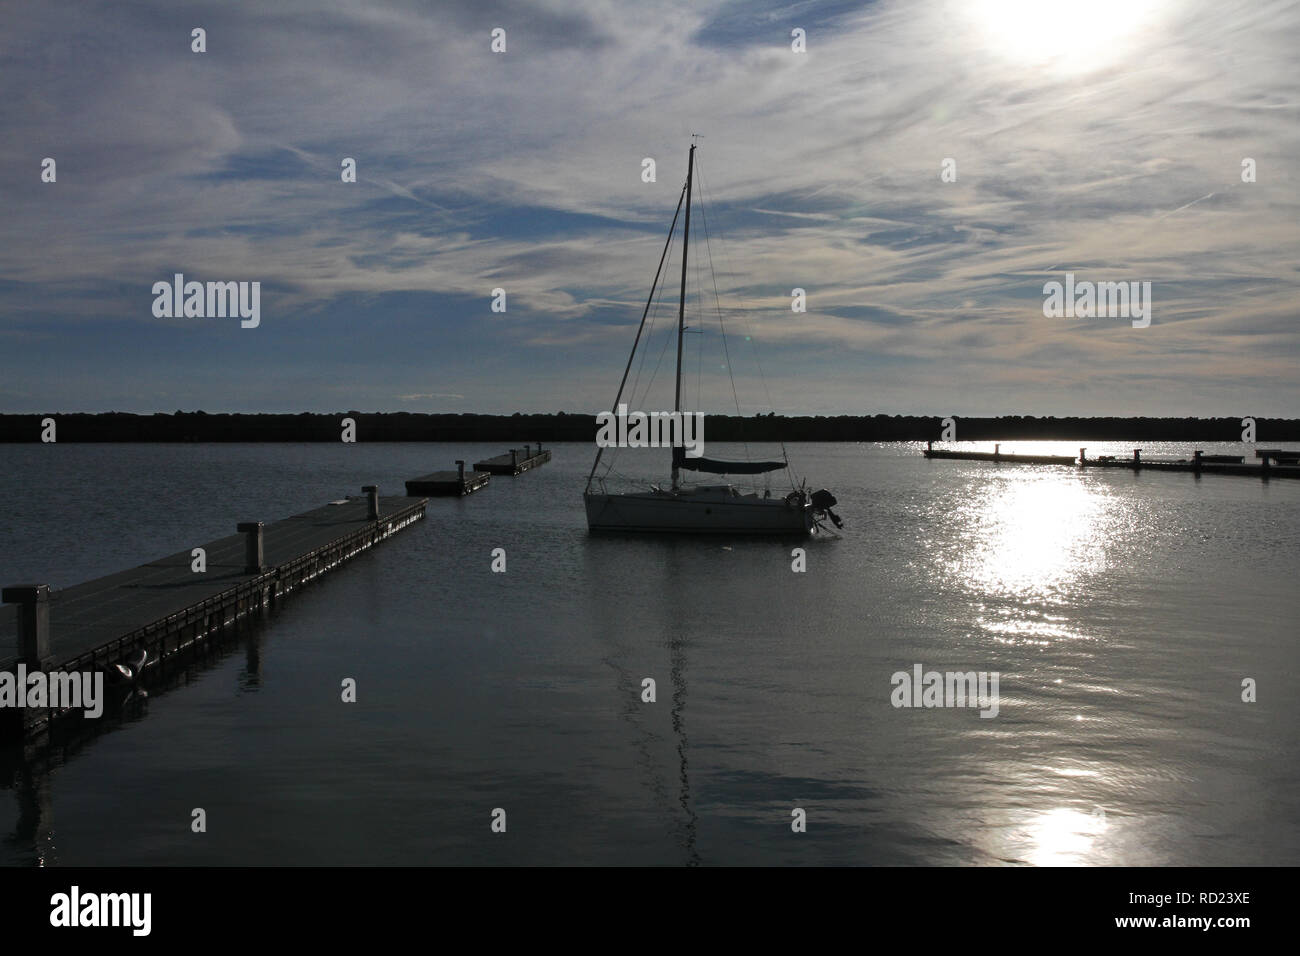 sailboat or sailing boat moored or tied up on Christmas Day on the Adriatic Sea in the port or harbour of Numana in the province of Ancona in Italy Stock Photo